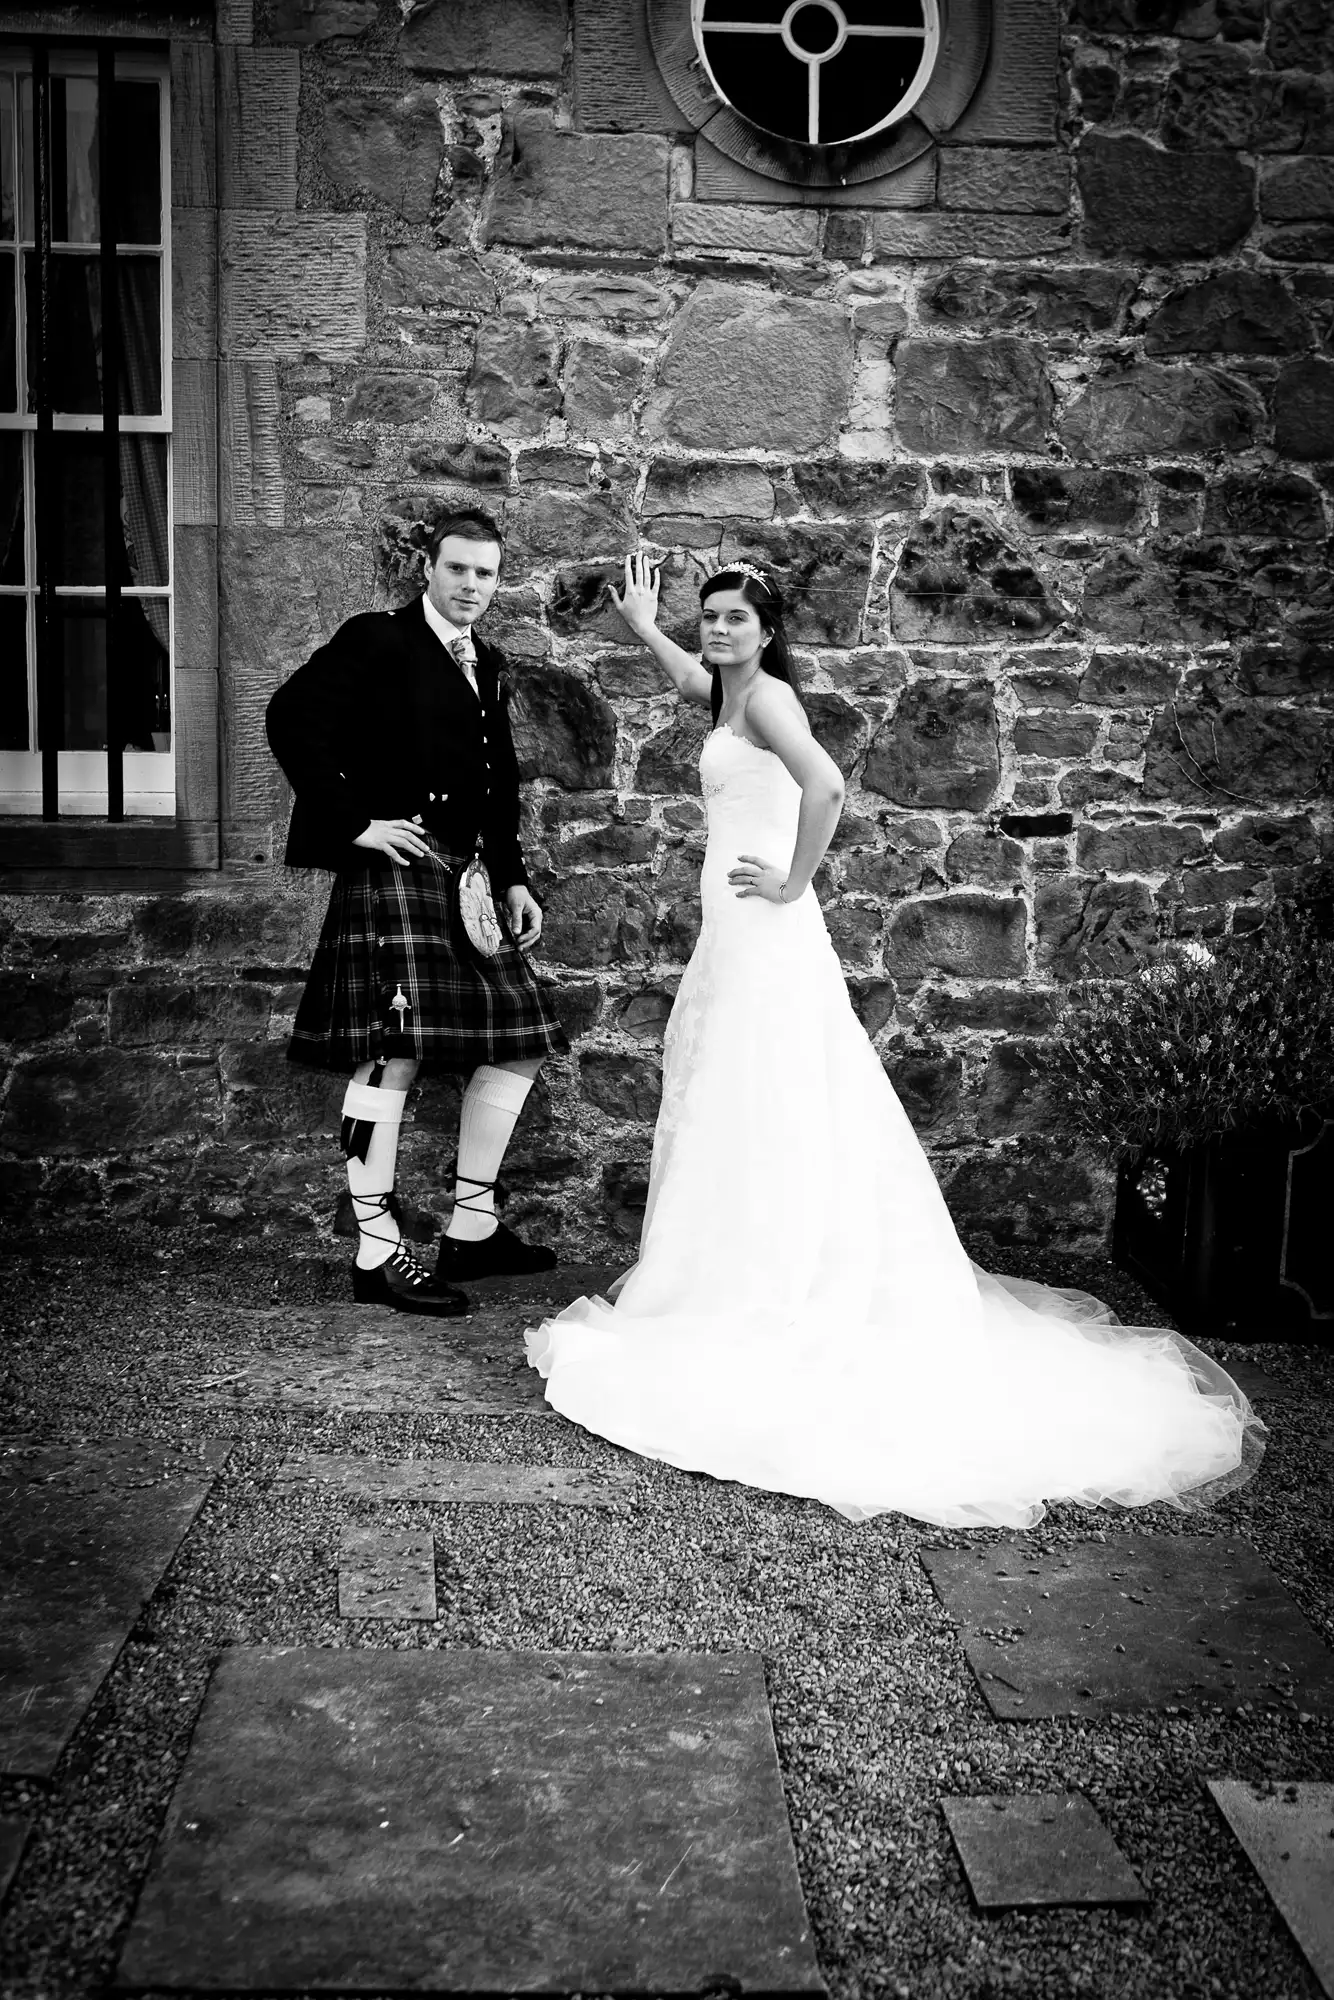 A bride and groom dressed in a white gown and a kilt wave to the camera in front of a stone building.